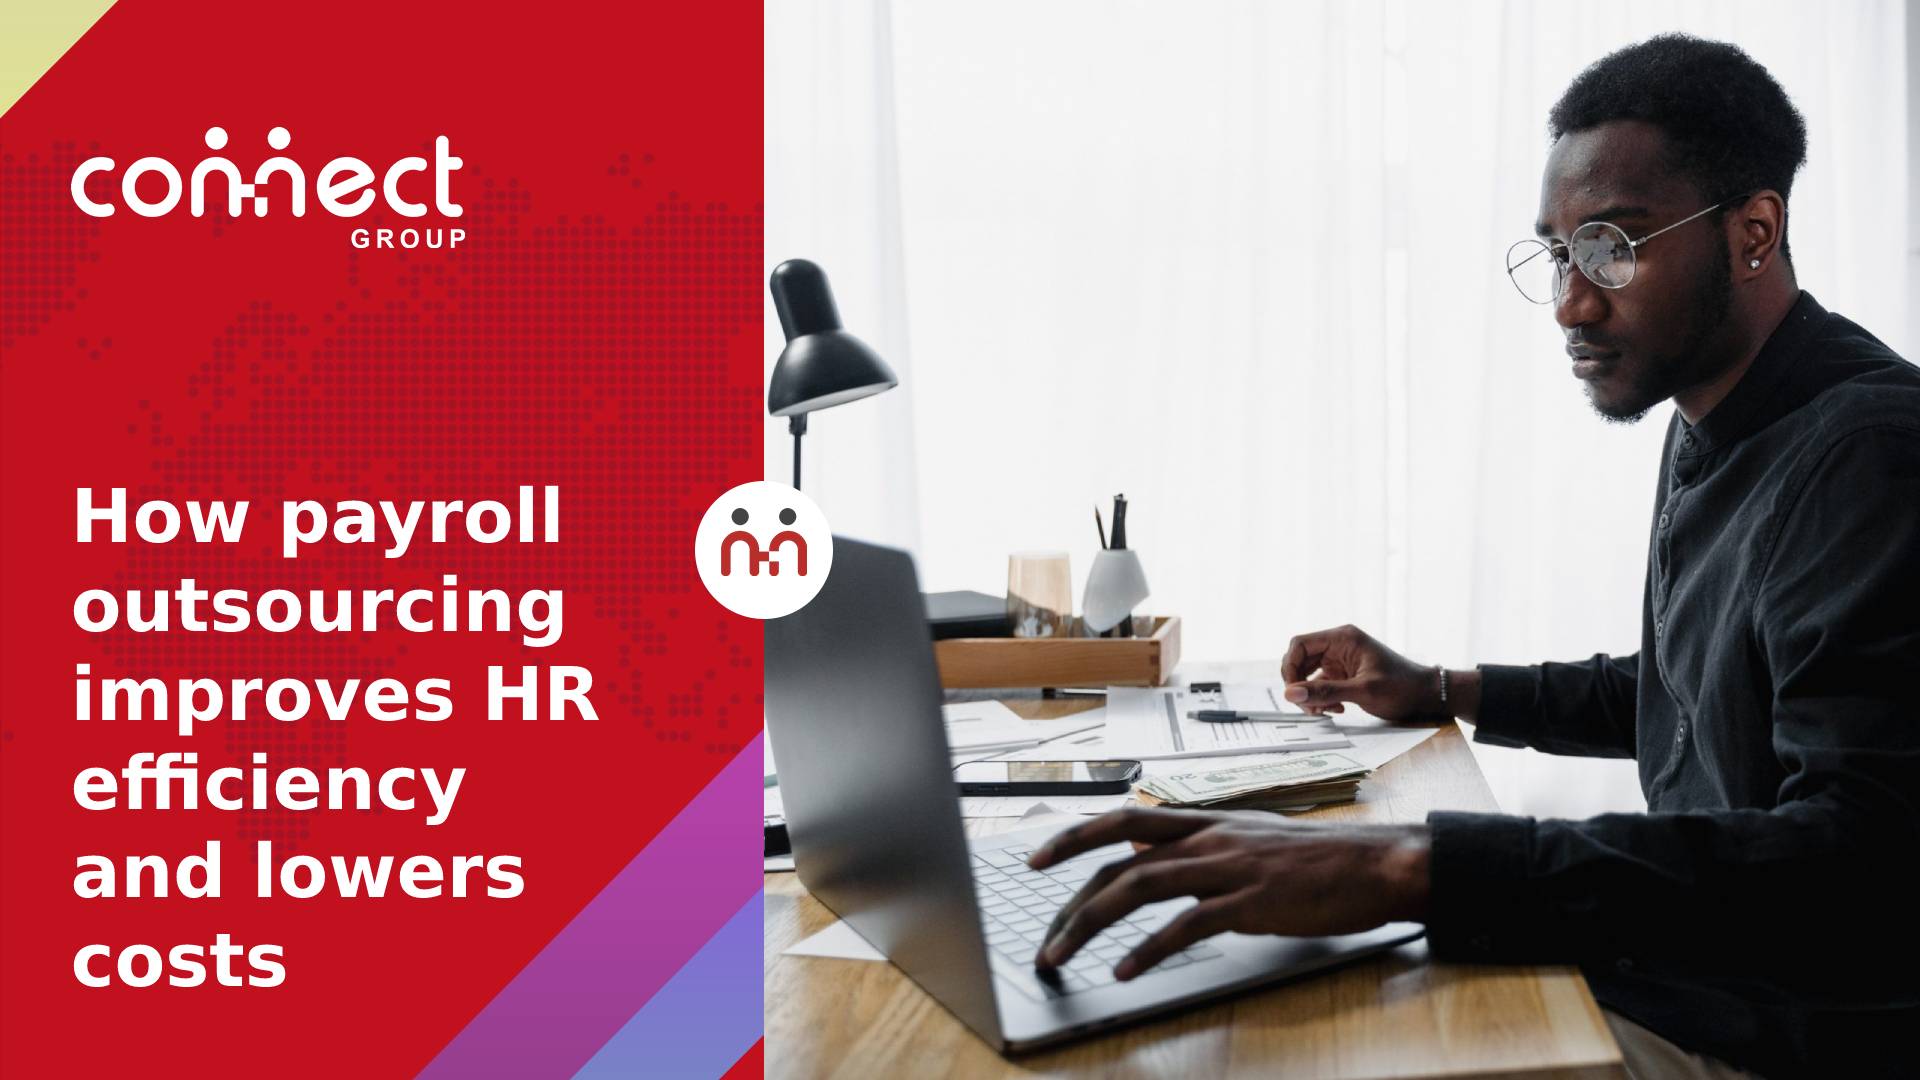 How payroll outsourcing improves HR efficiency and lowers costs